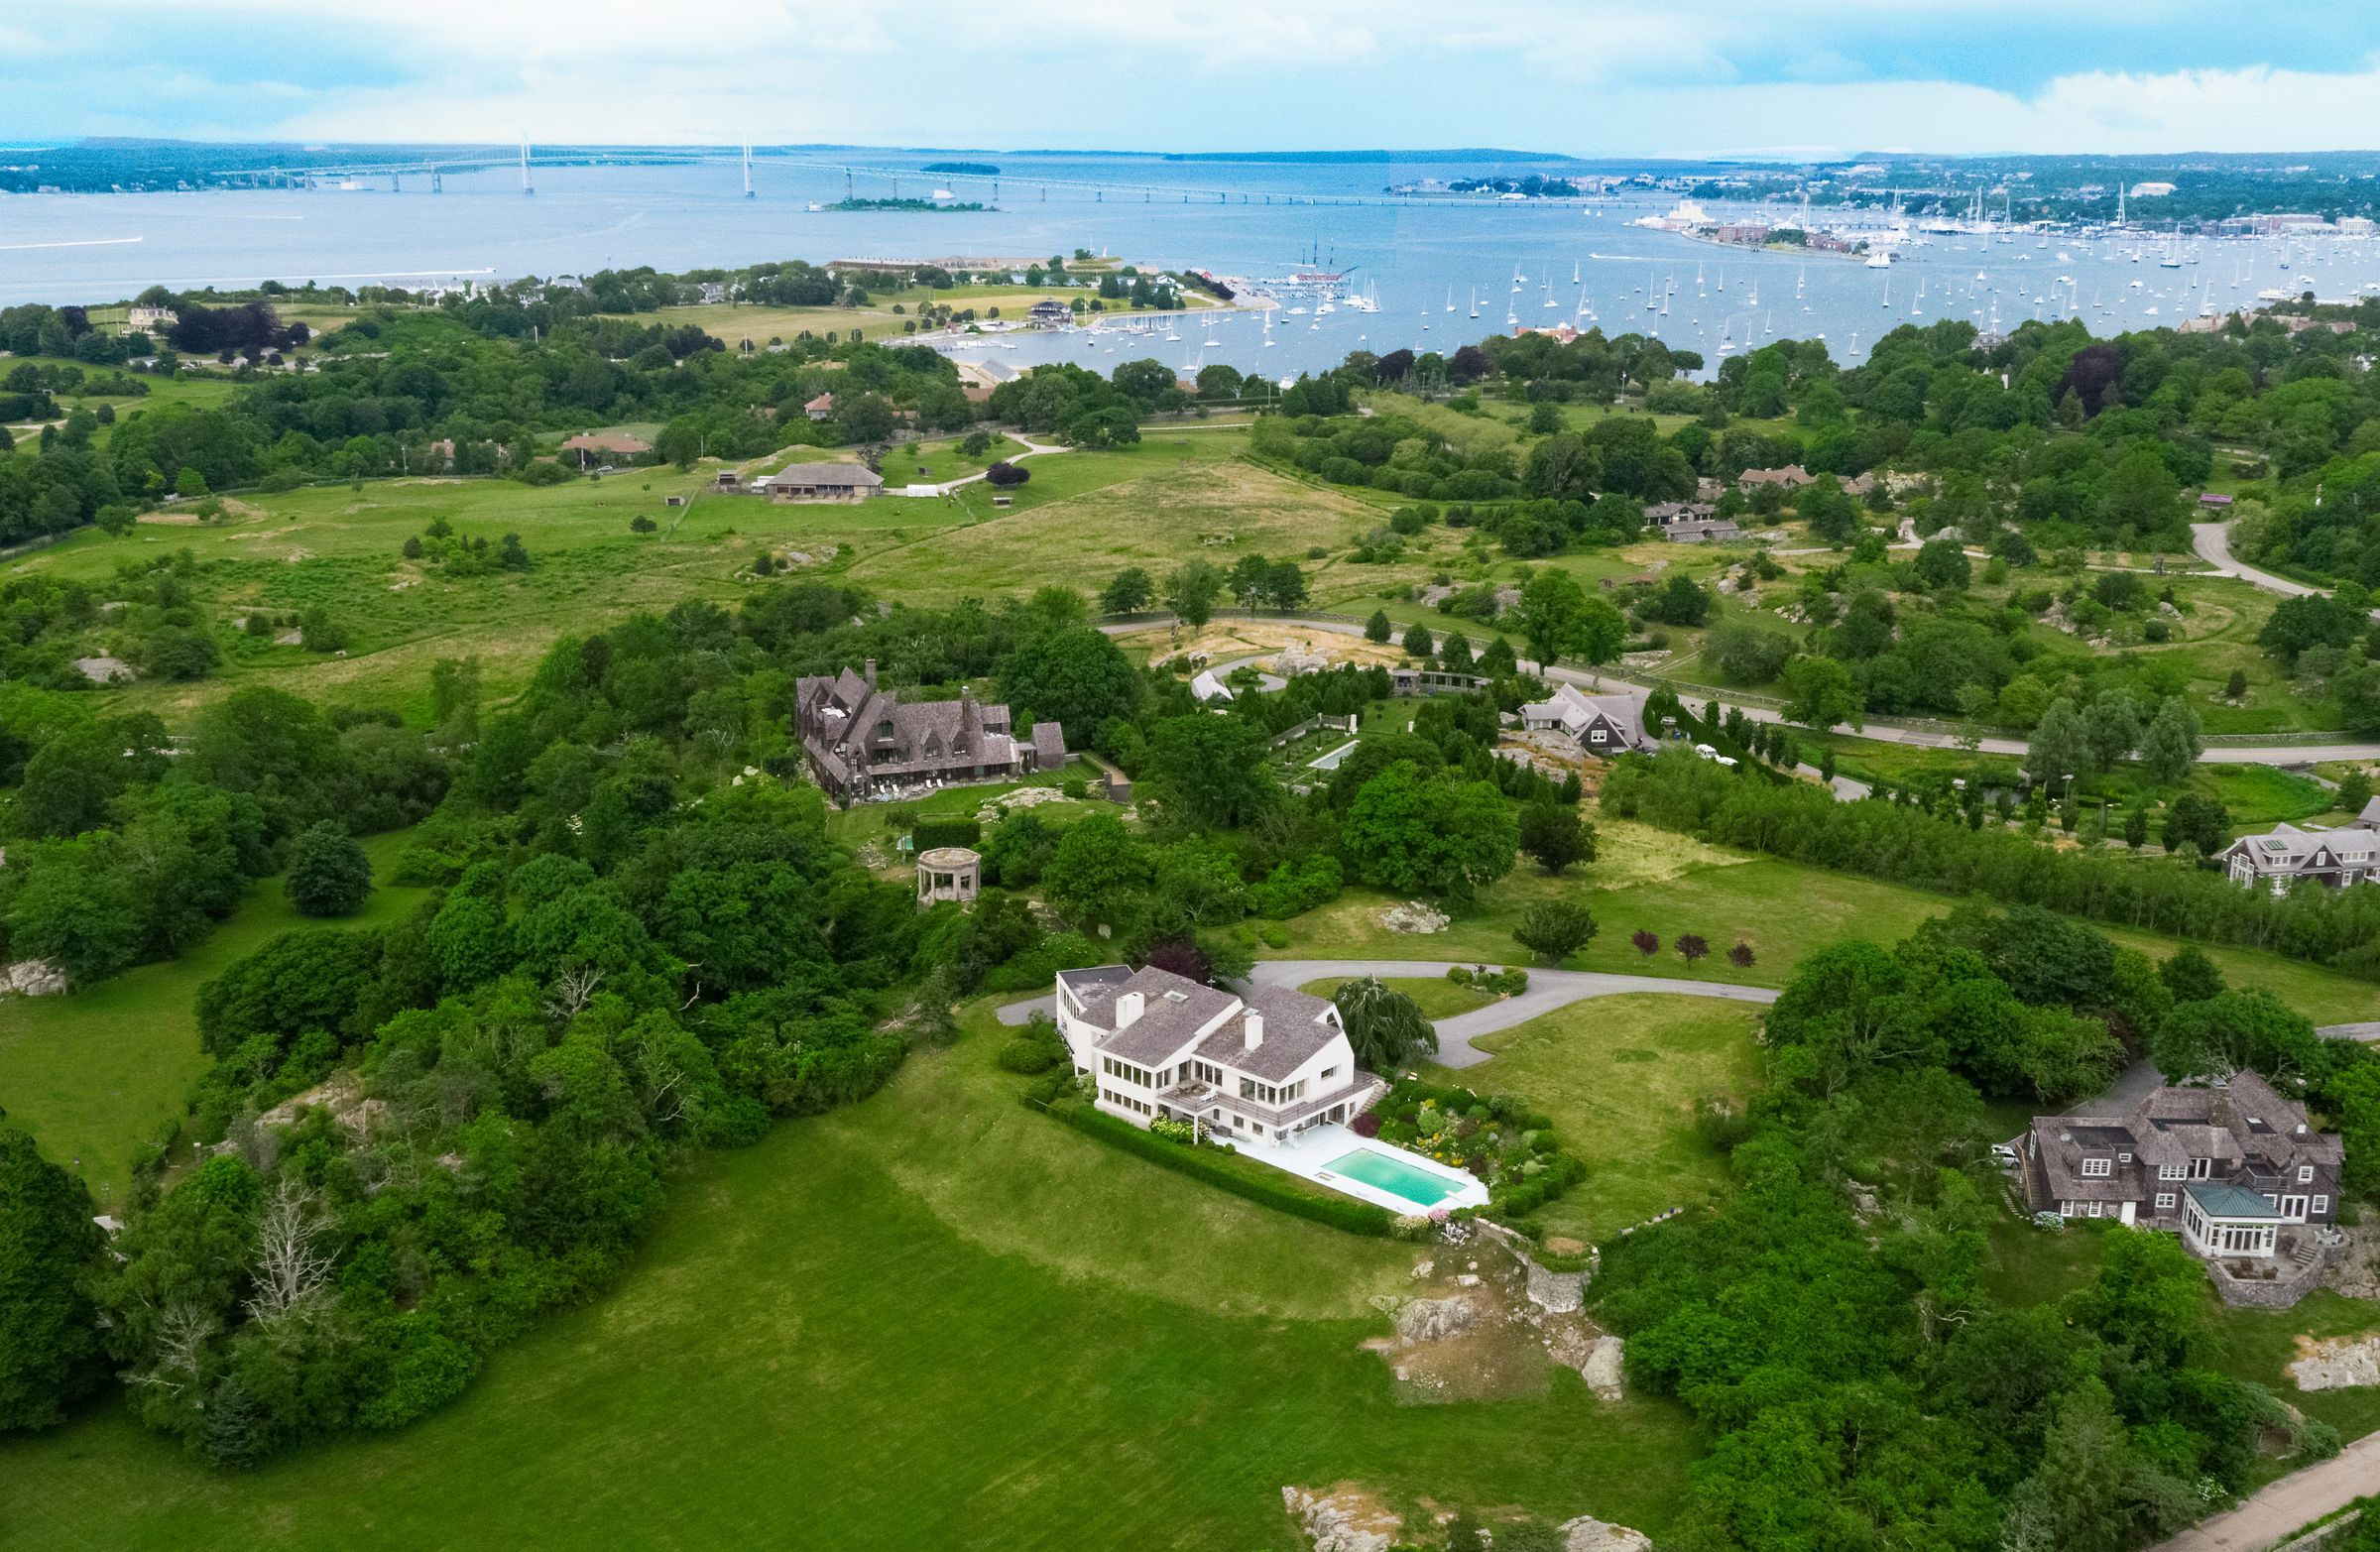 LILA DELMAN COMPASS SELLS ‘BEACON HILL HOUSE’ MARKING THIRD HIGHEST SINGLE-FAMILY HOME SALE IN NEWPORT COUNTY THIS YEAR